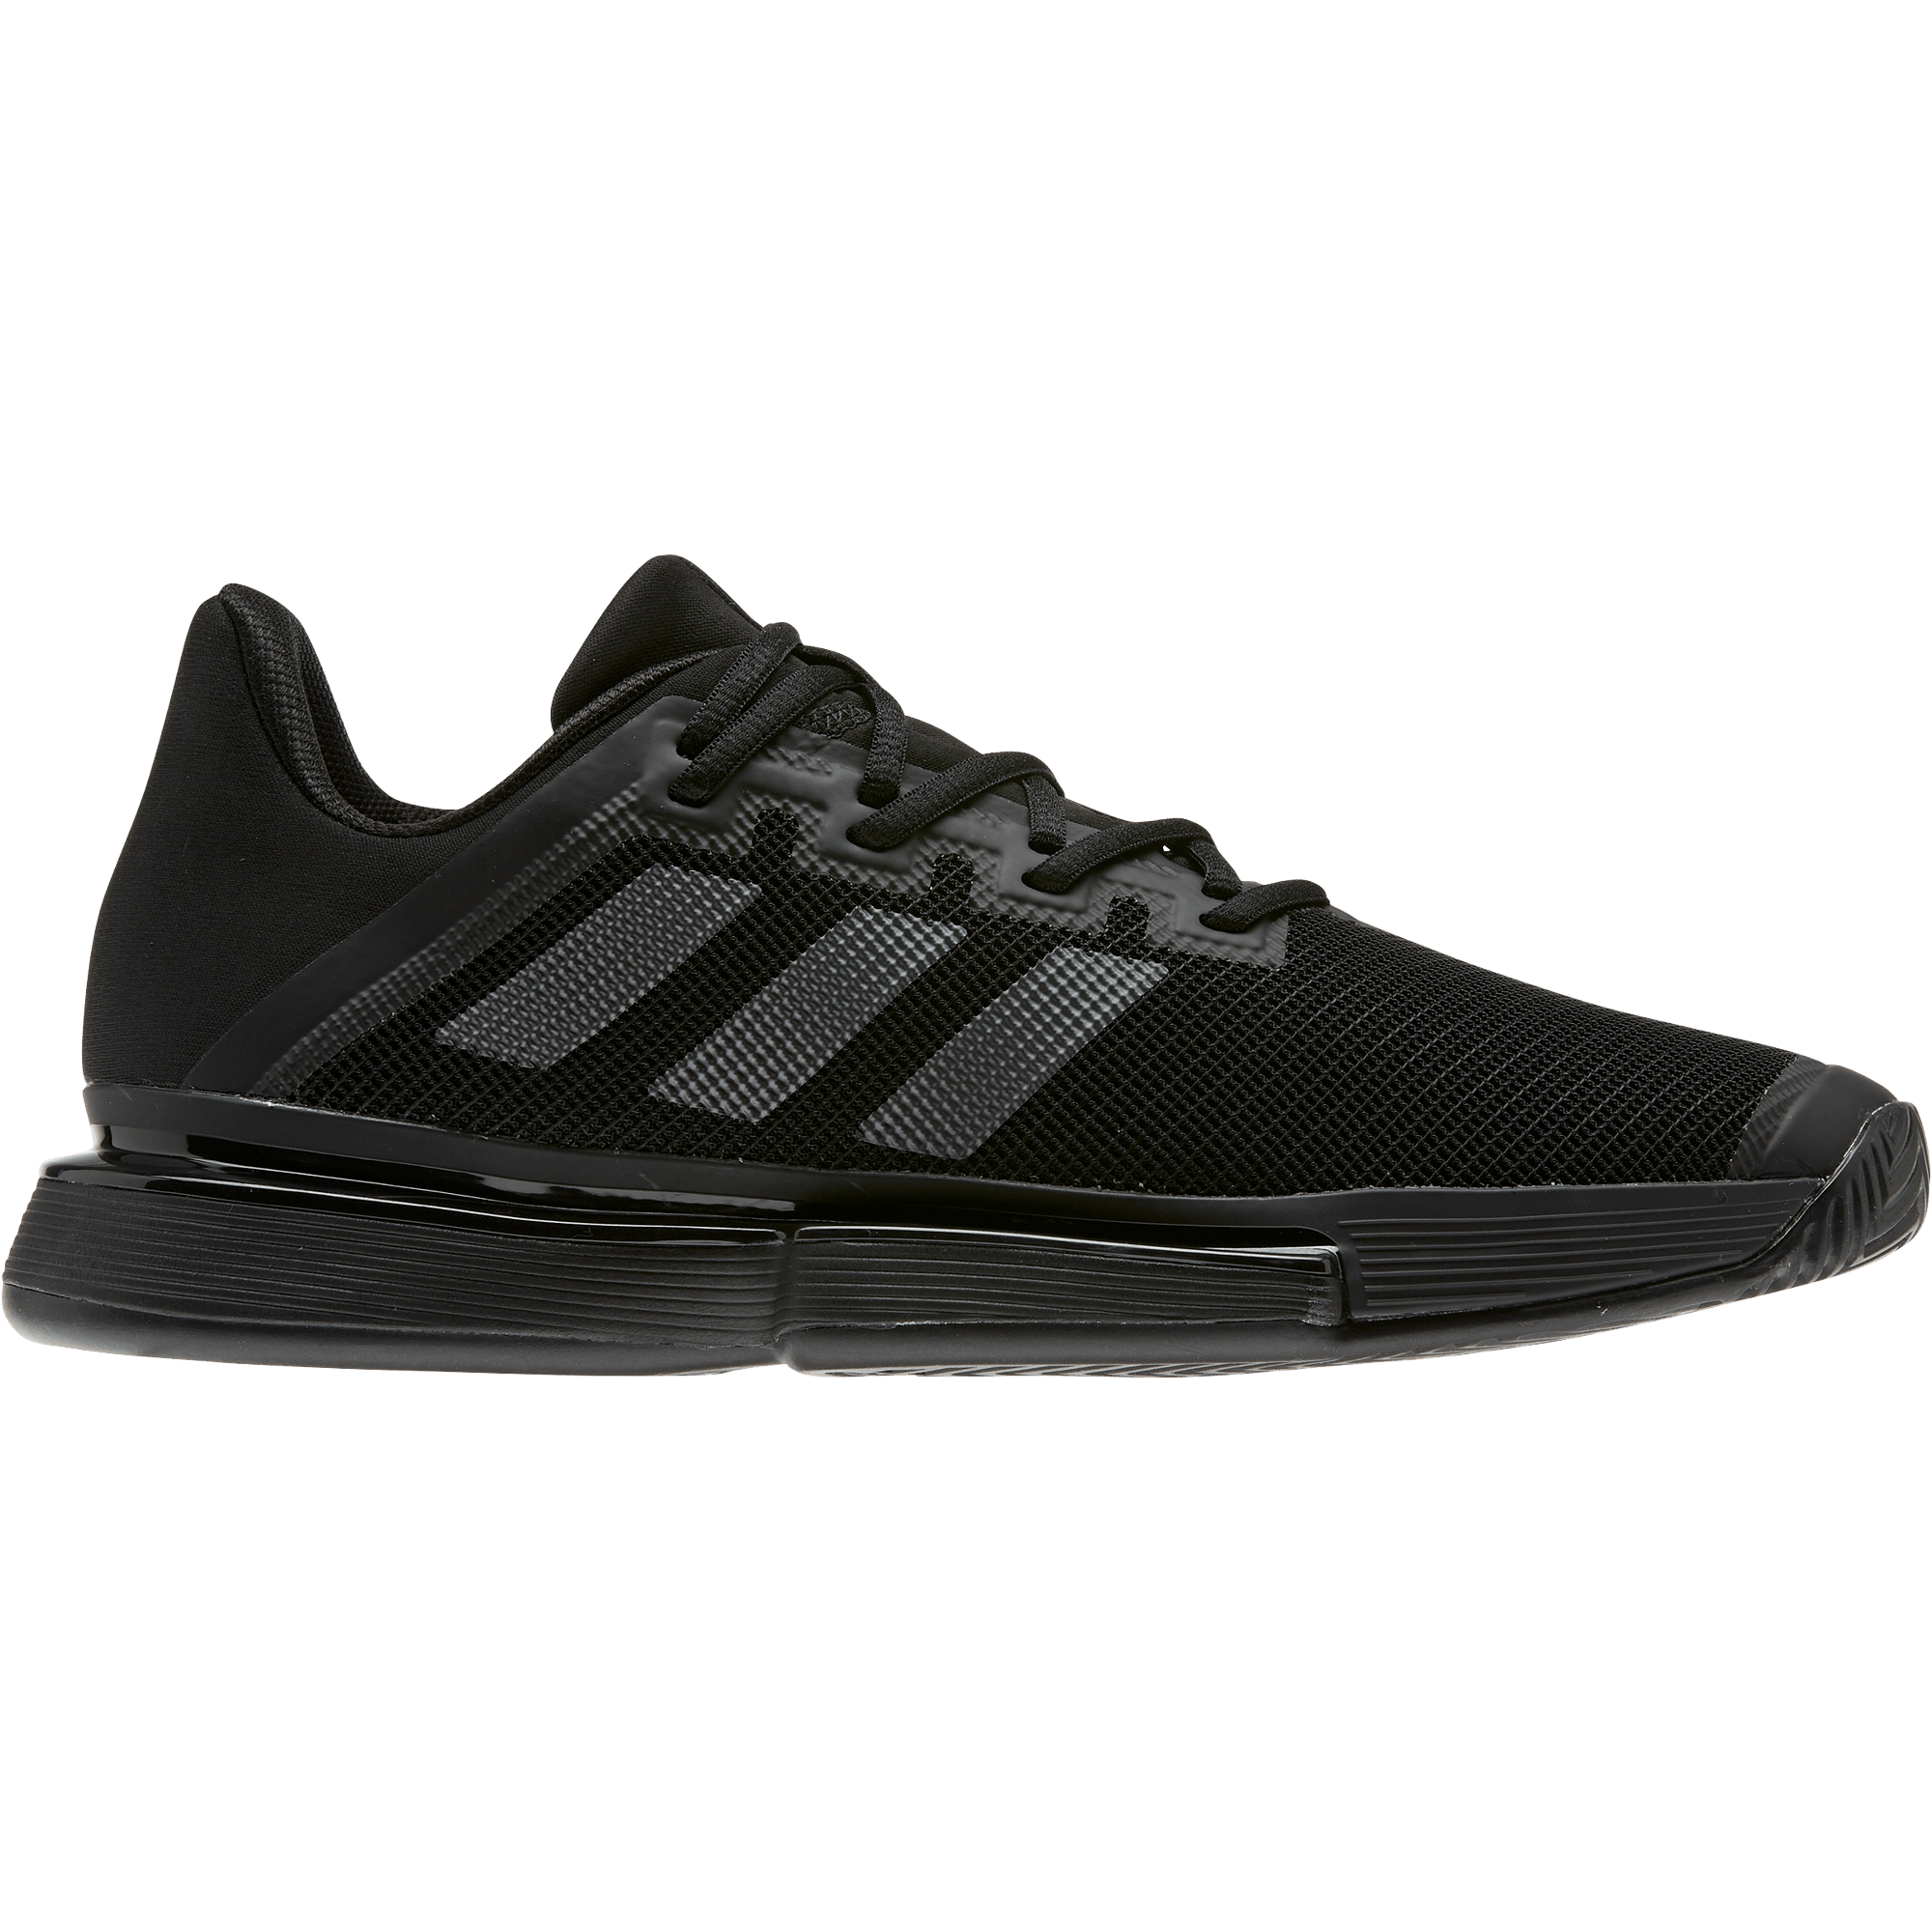 95 Trend Adidas eyota m black running shoes Trend in 2020